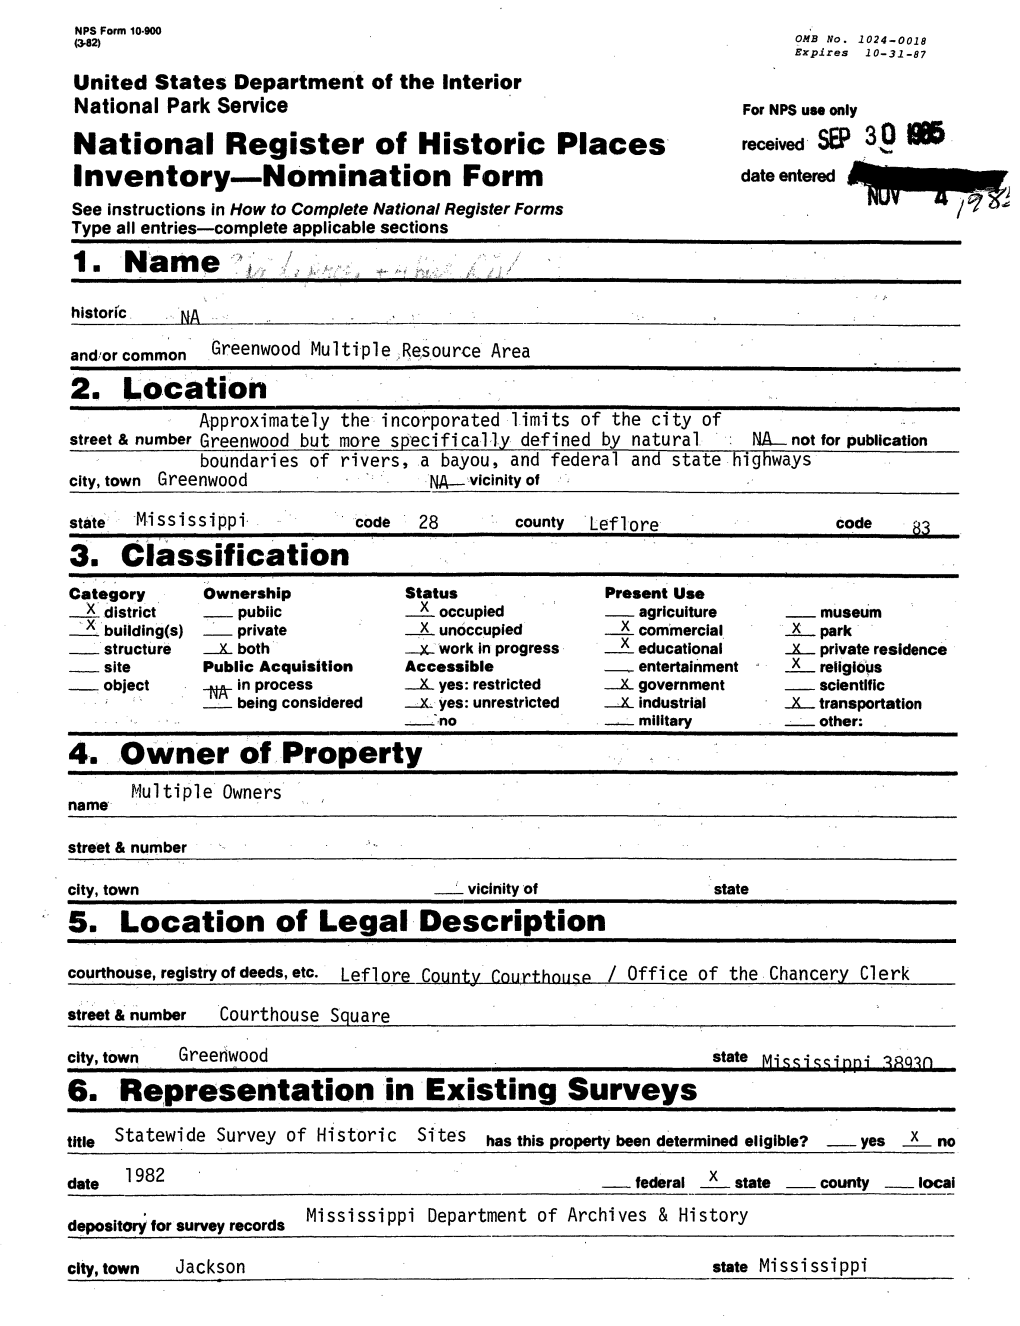 National Register of Historic Places Inventory Nomination Form 2. Location